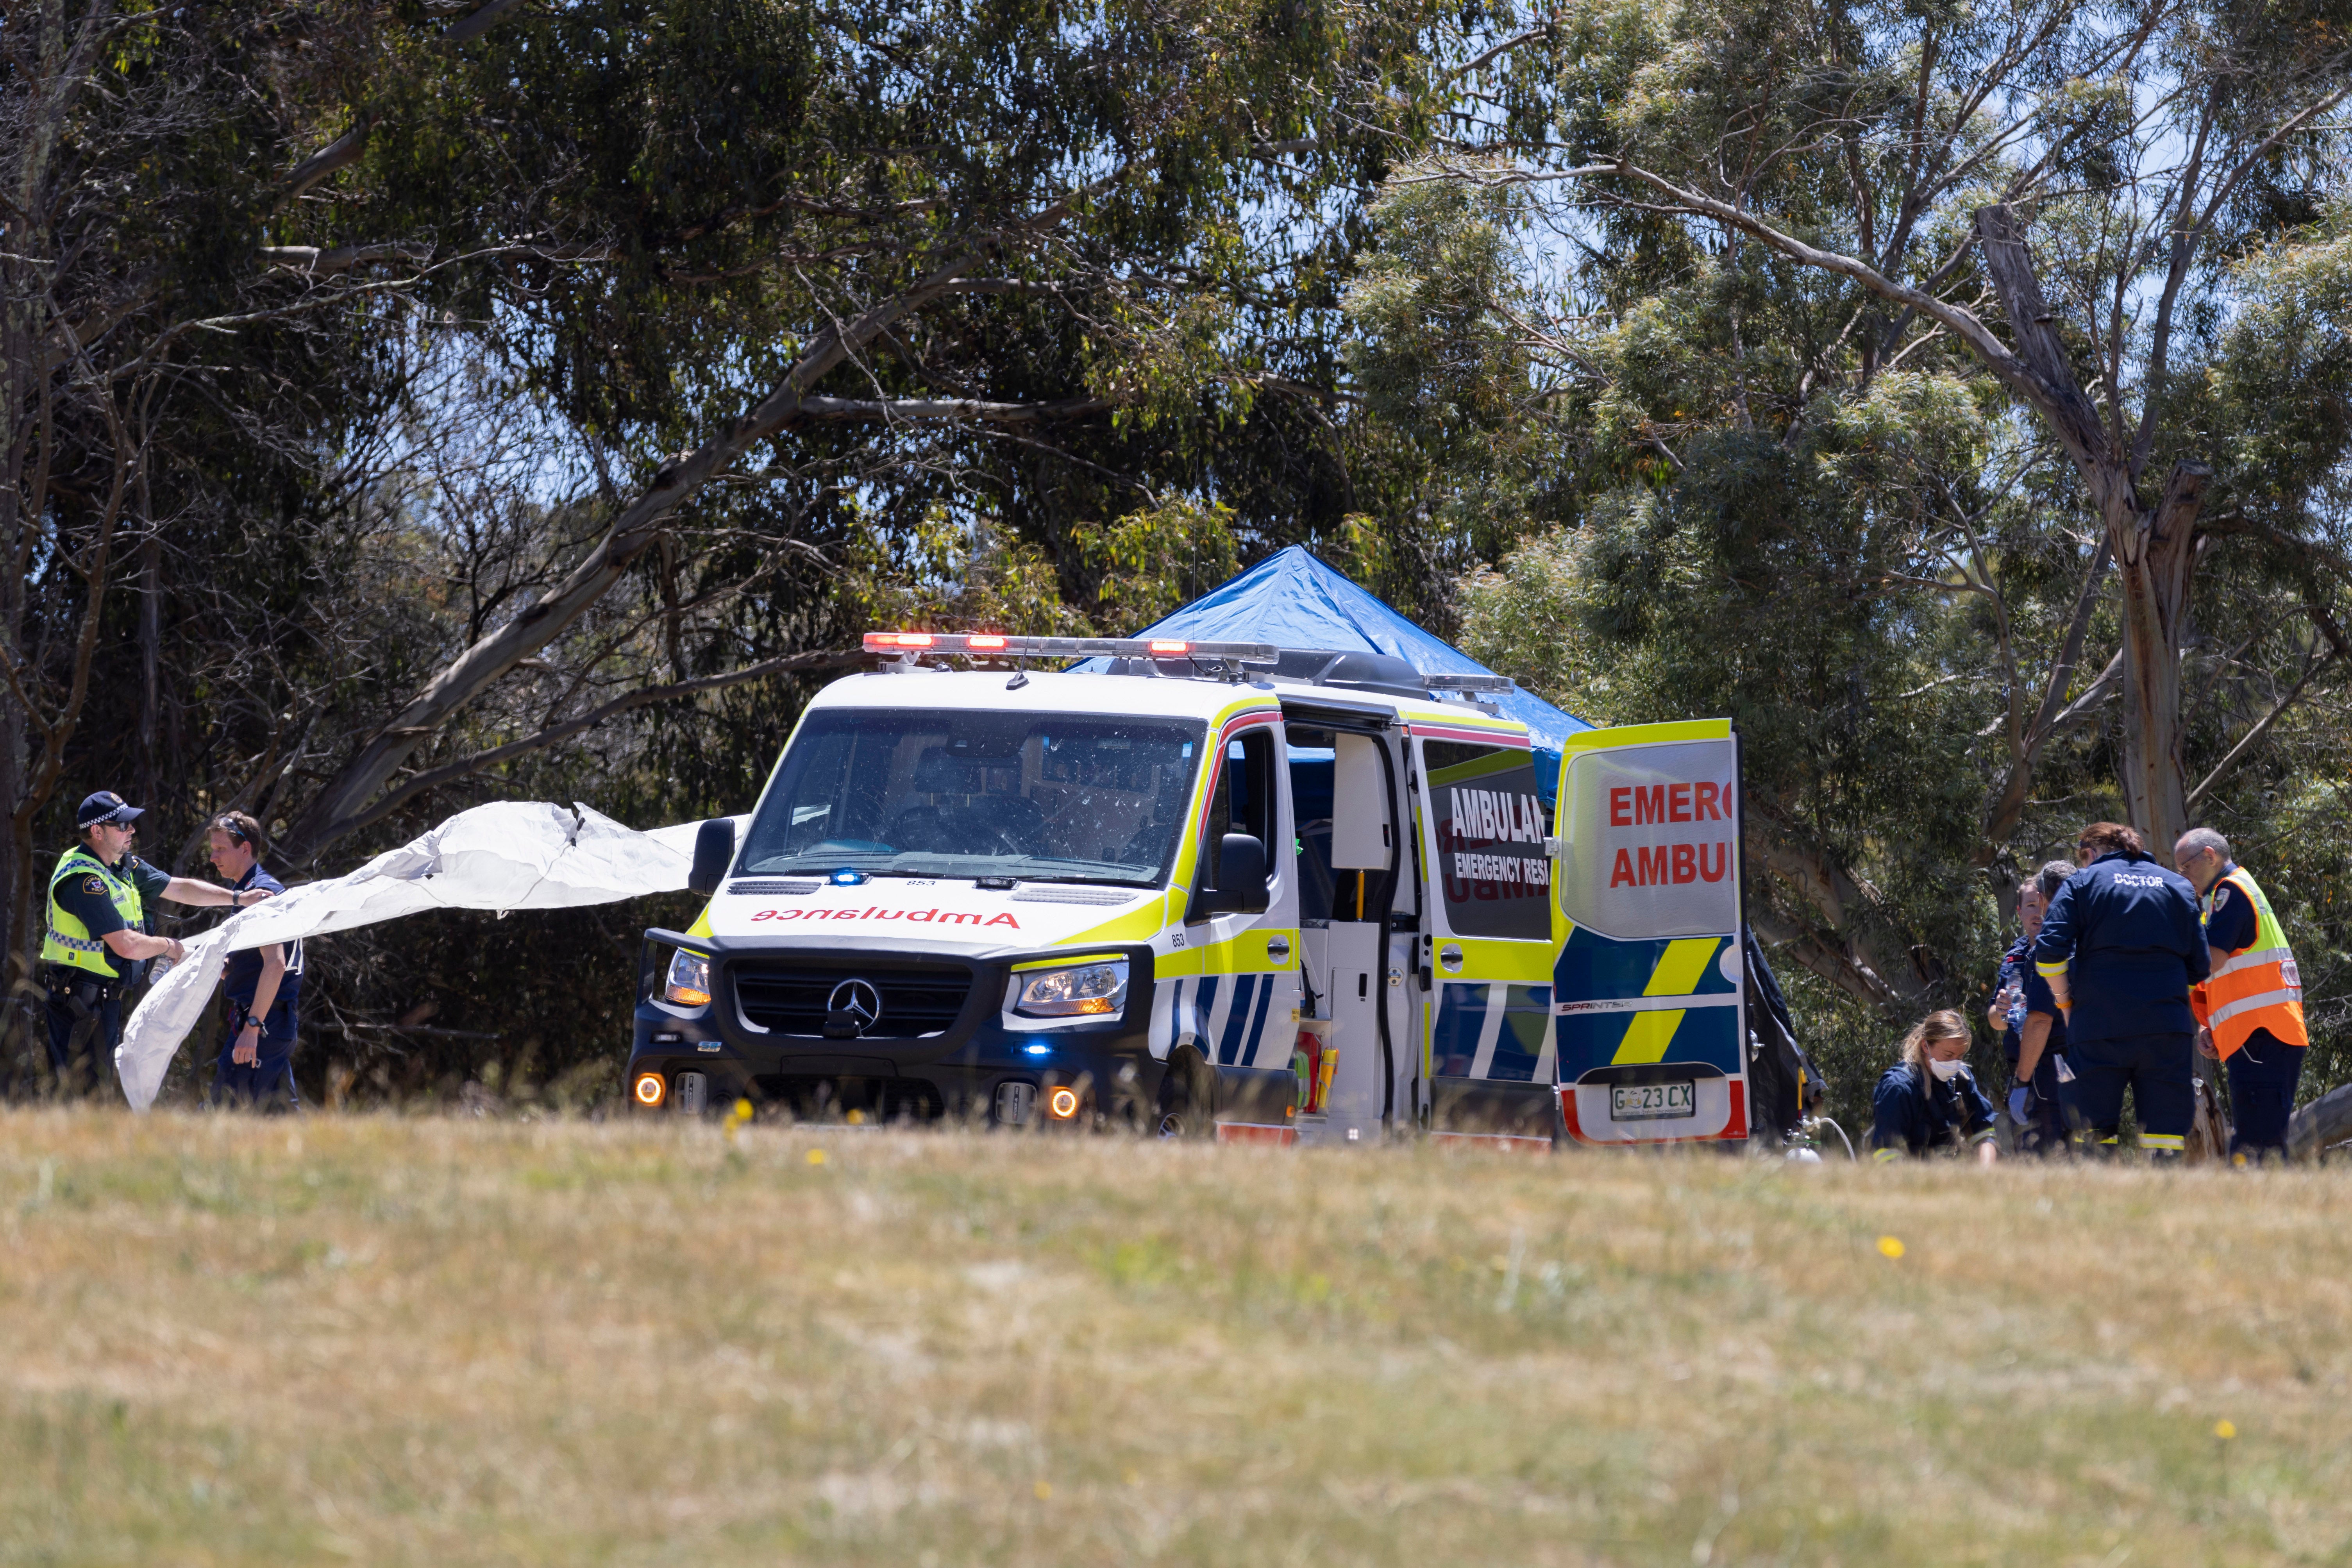 Emergency services personnel work at the scene of the deadly incident in Tasmania